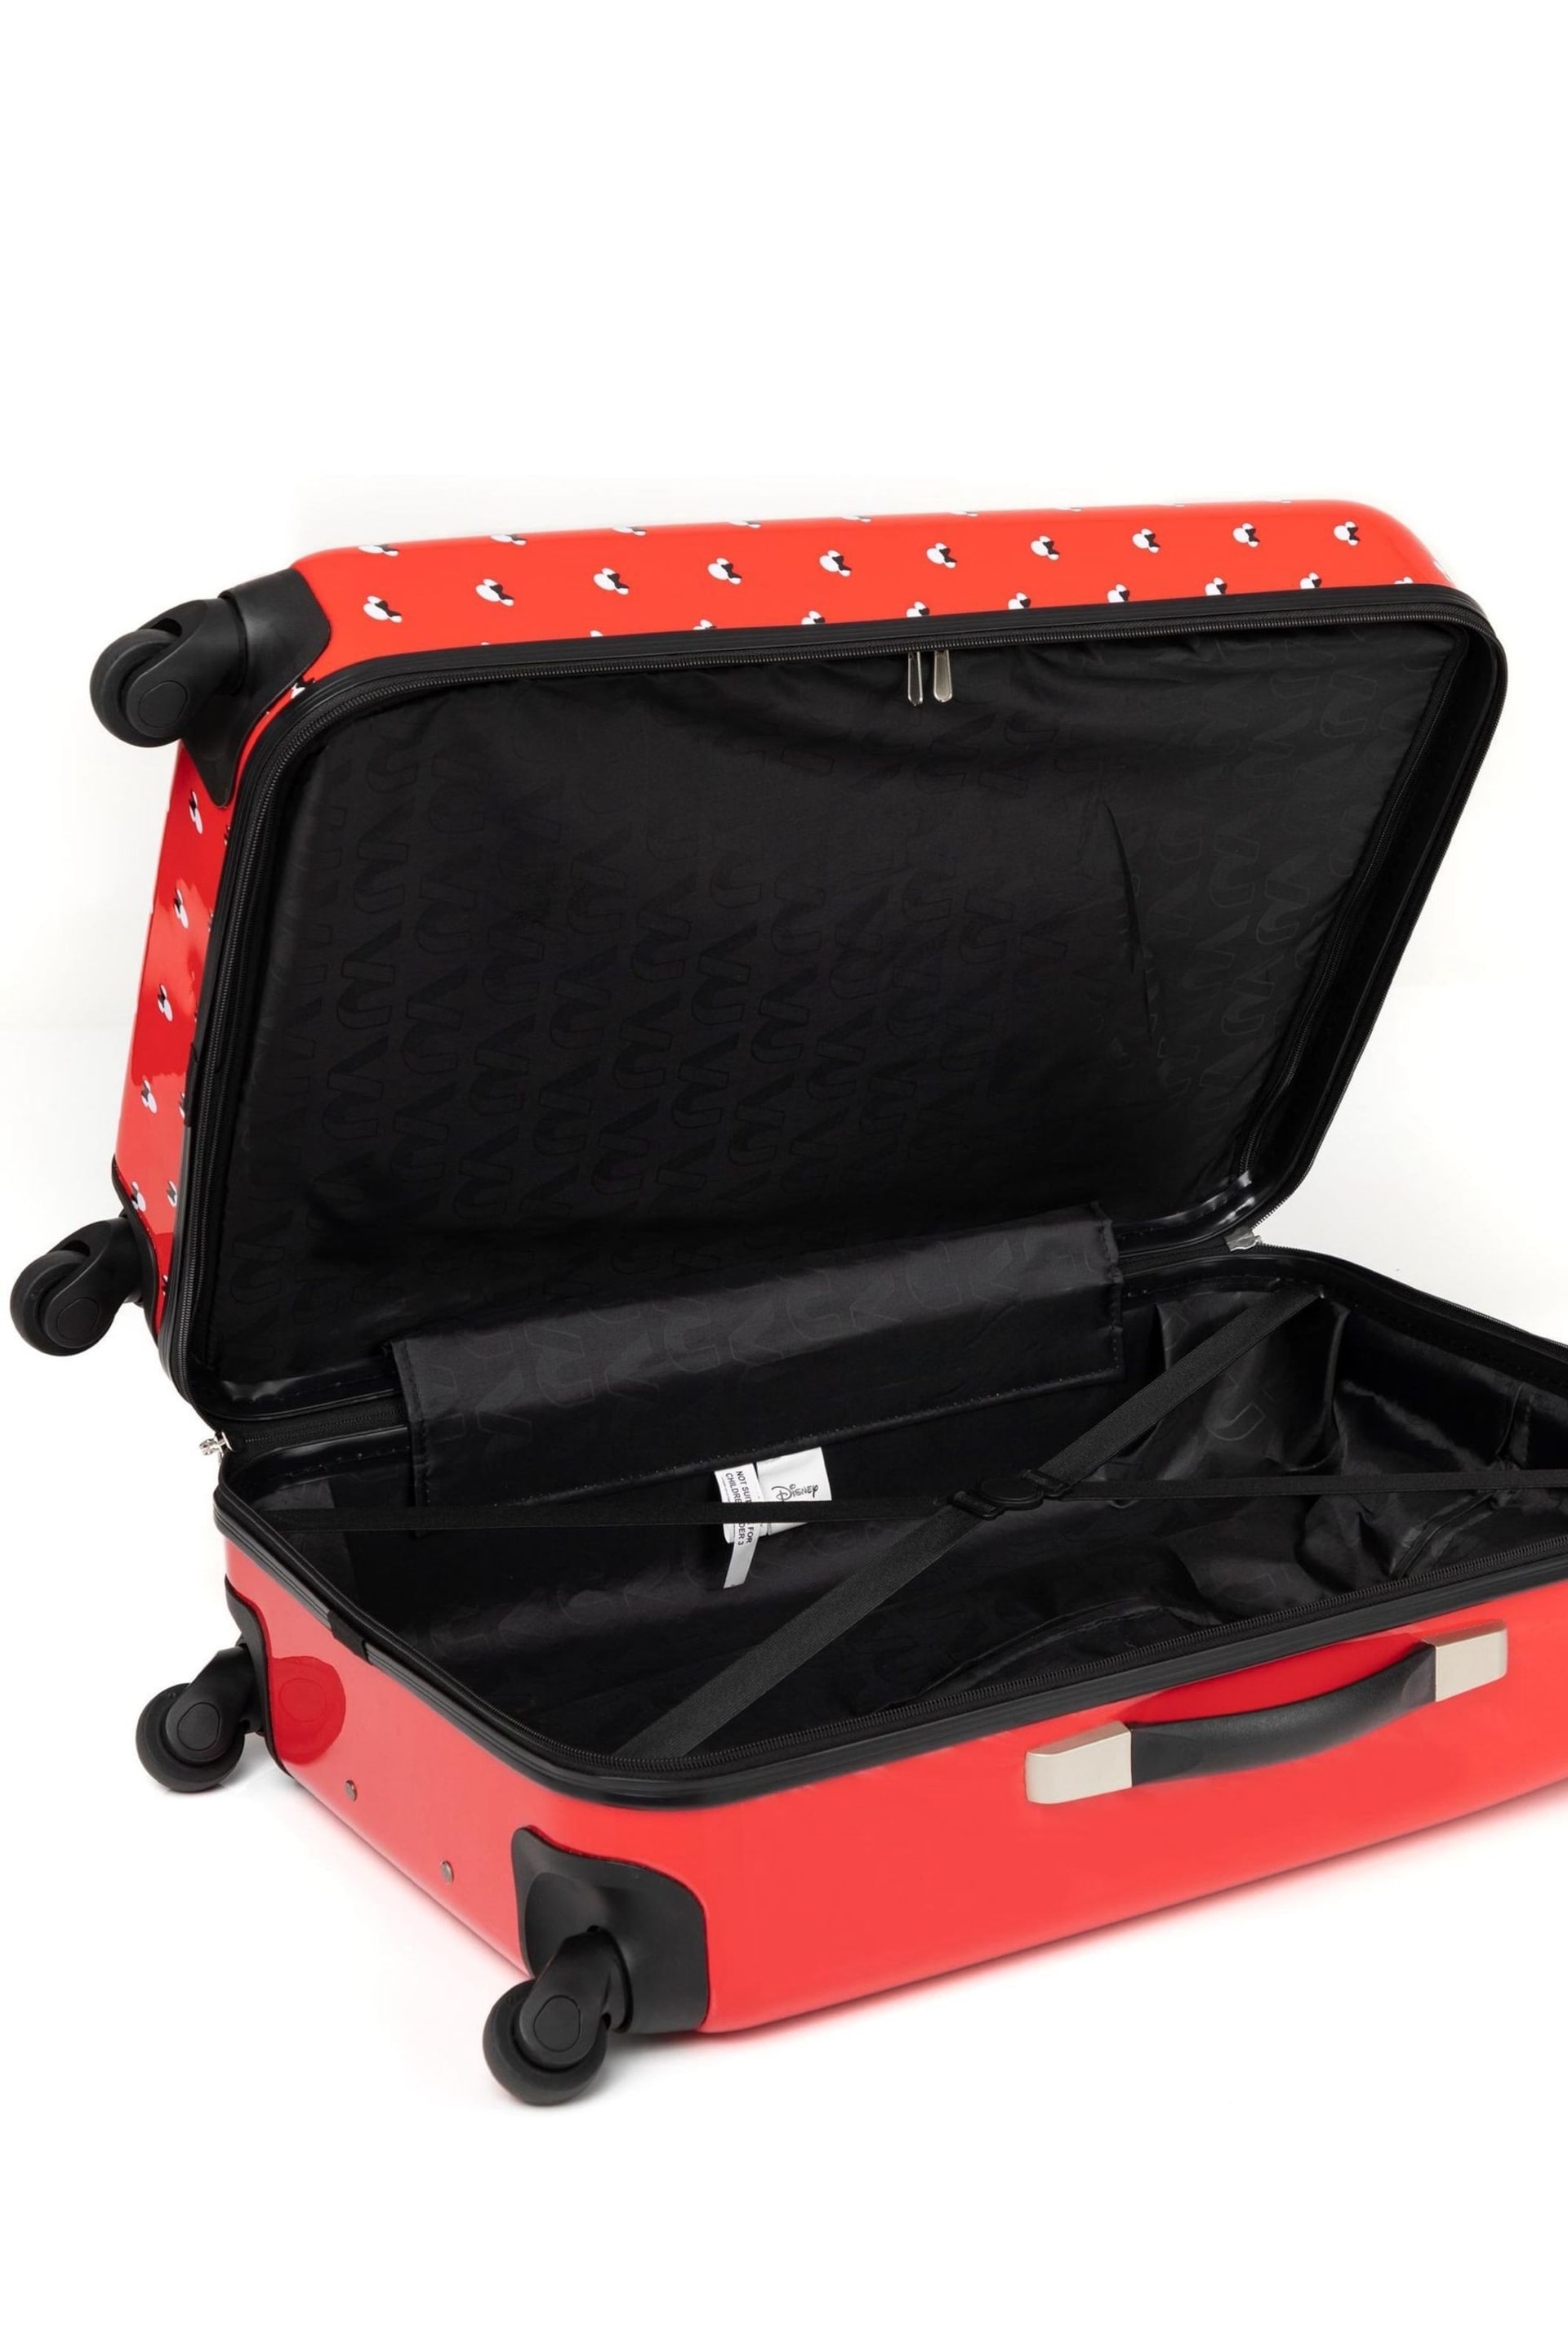 Vanilla Underground Red Minnie Mouse Suitcases - Image 4 of 6